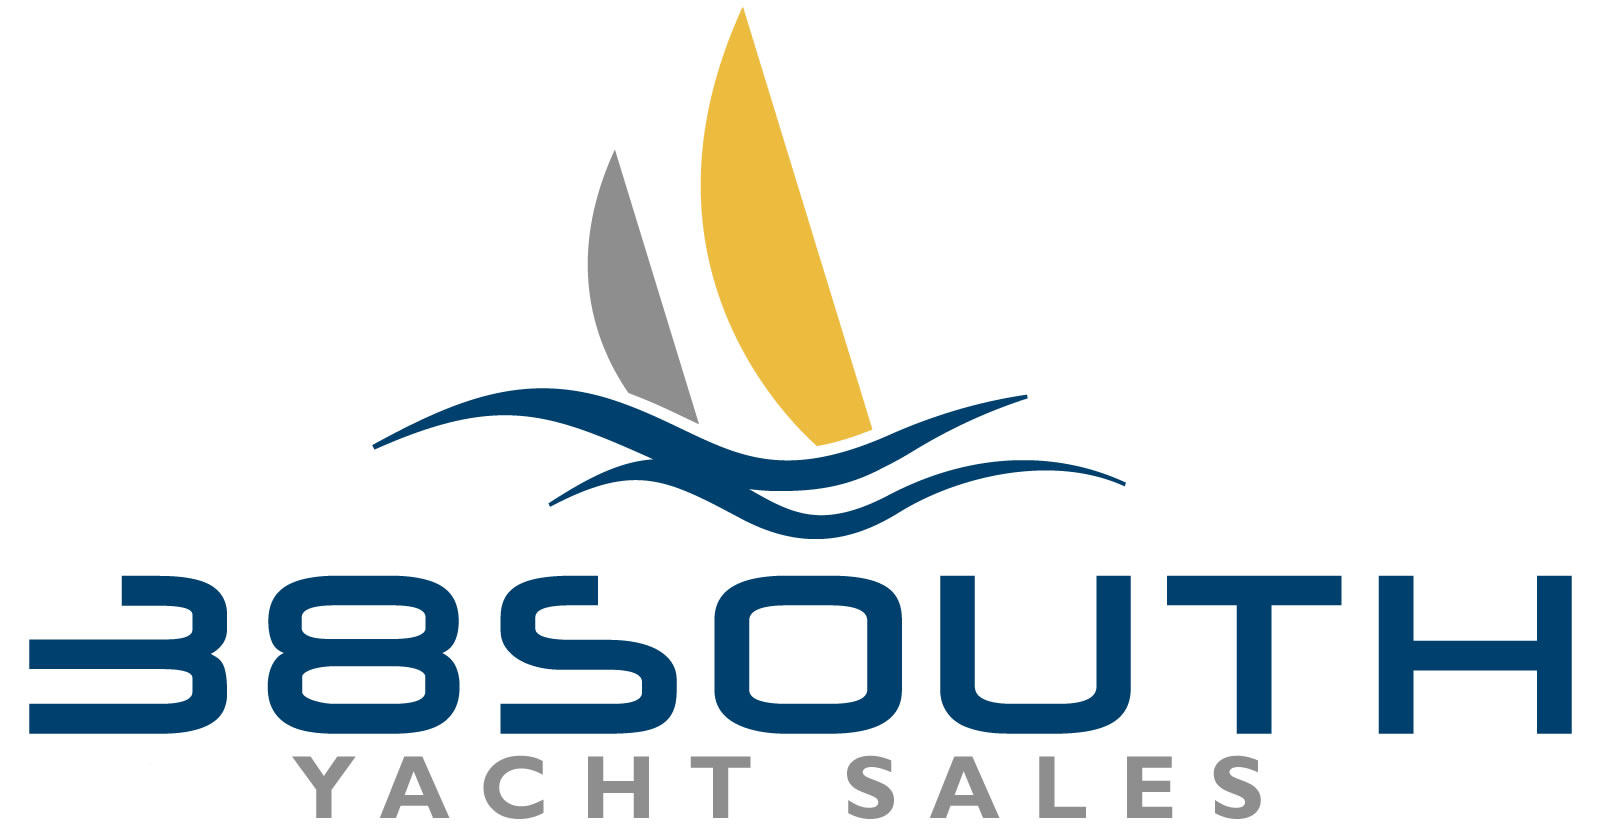 38 South Yacht Sales